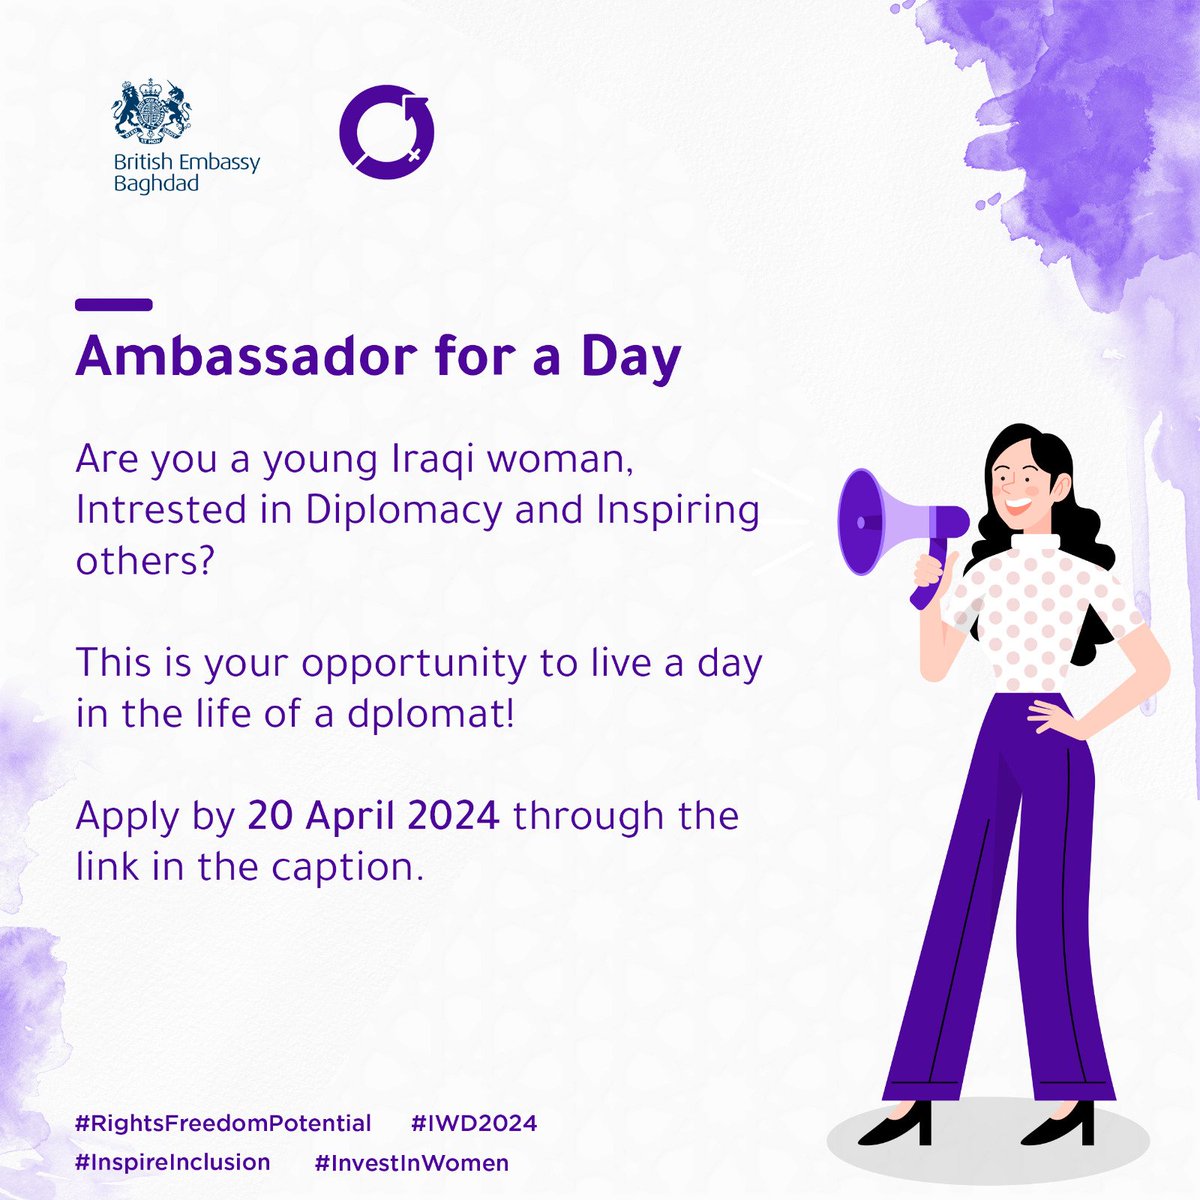 Are you interested in diplomacy, foreign affairs&international relations? Are you a woman between 18-20&living in Iraq? Here’s your opportunity to join the British Ambassador and the Chargé d'Affaires at the British Embassy Baghdad for a day. Apply Here forms.gle/cRYBJ6PozzDFKm…